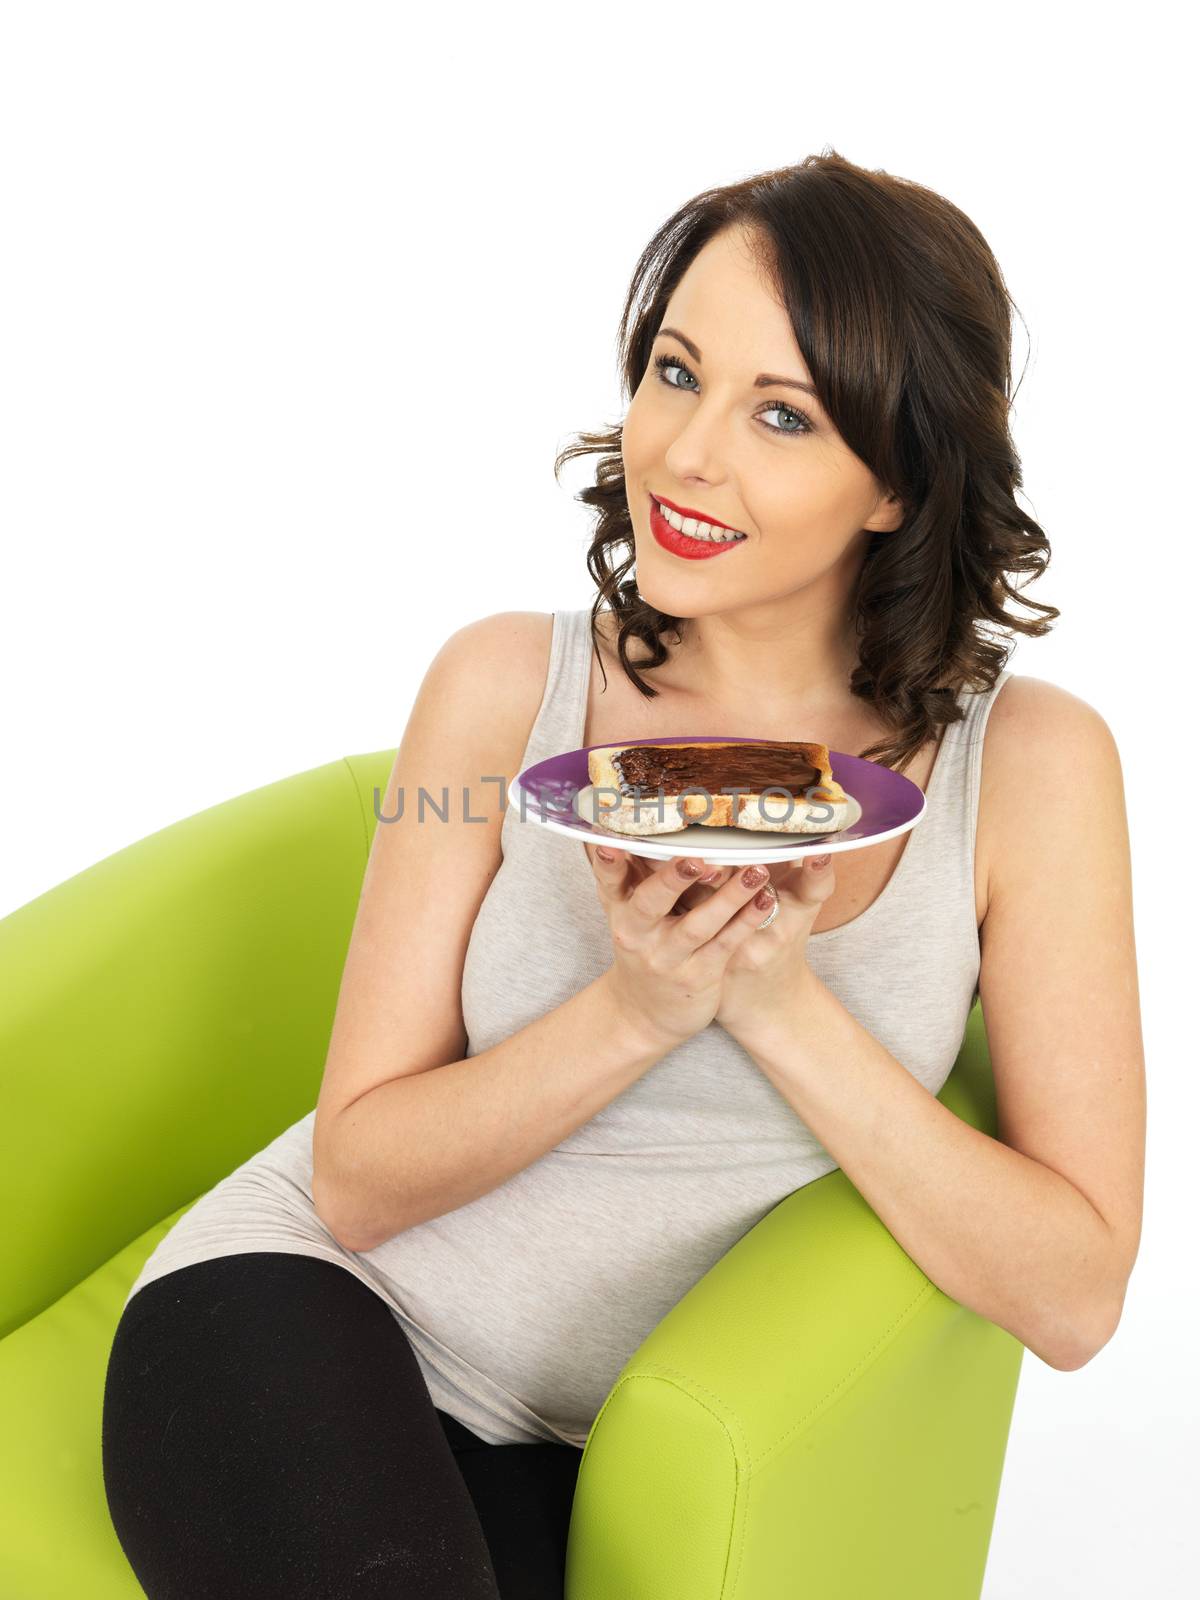 Healthy Young Woman Holding Toast Spread with Yeast Extract